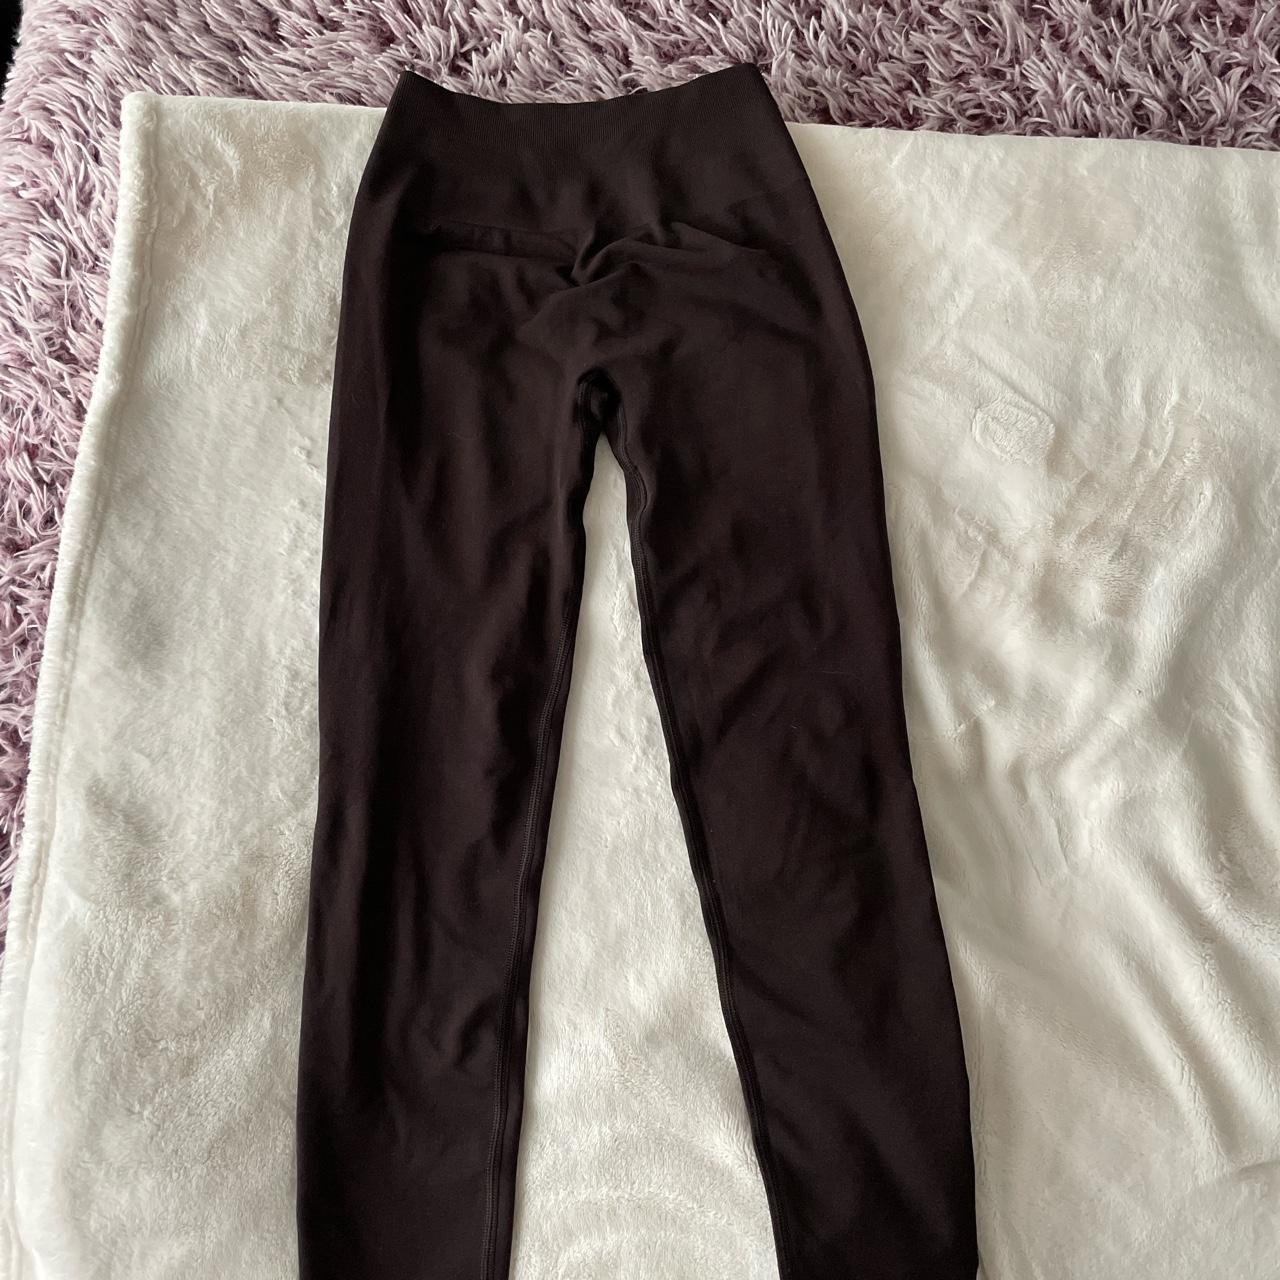 LEGGING REVIEW: alphalete amplify in chocolate #fyppp #fittok #gymtok